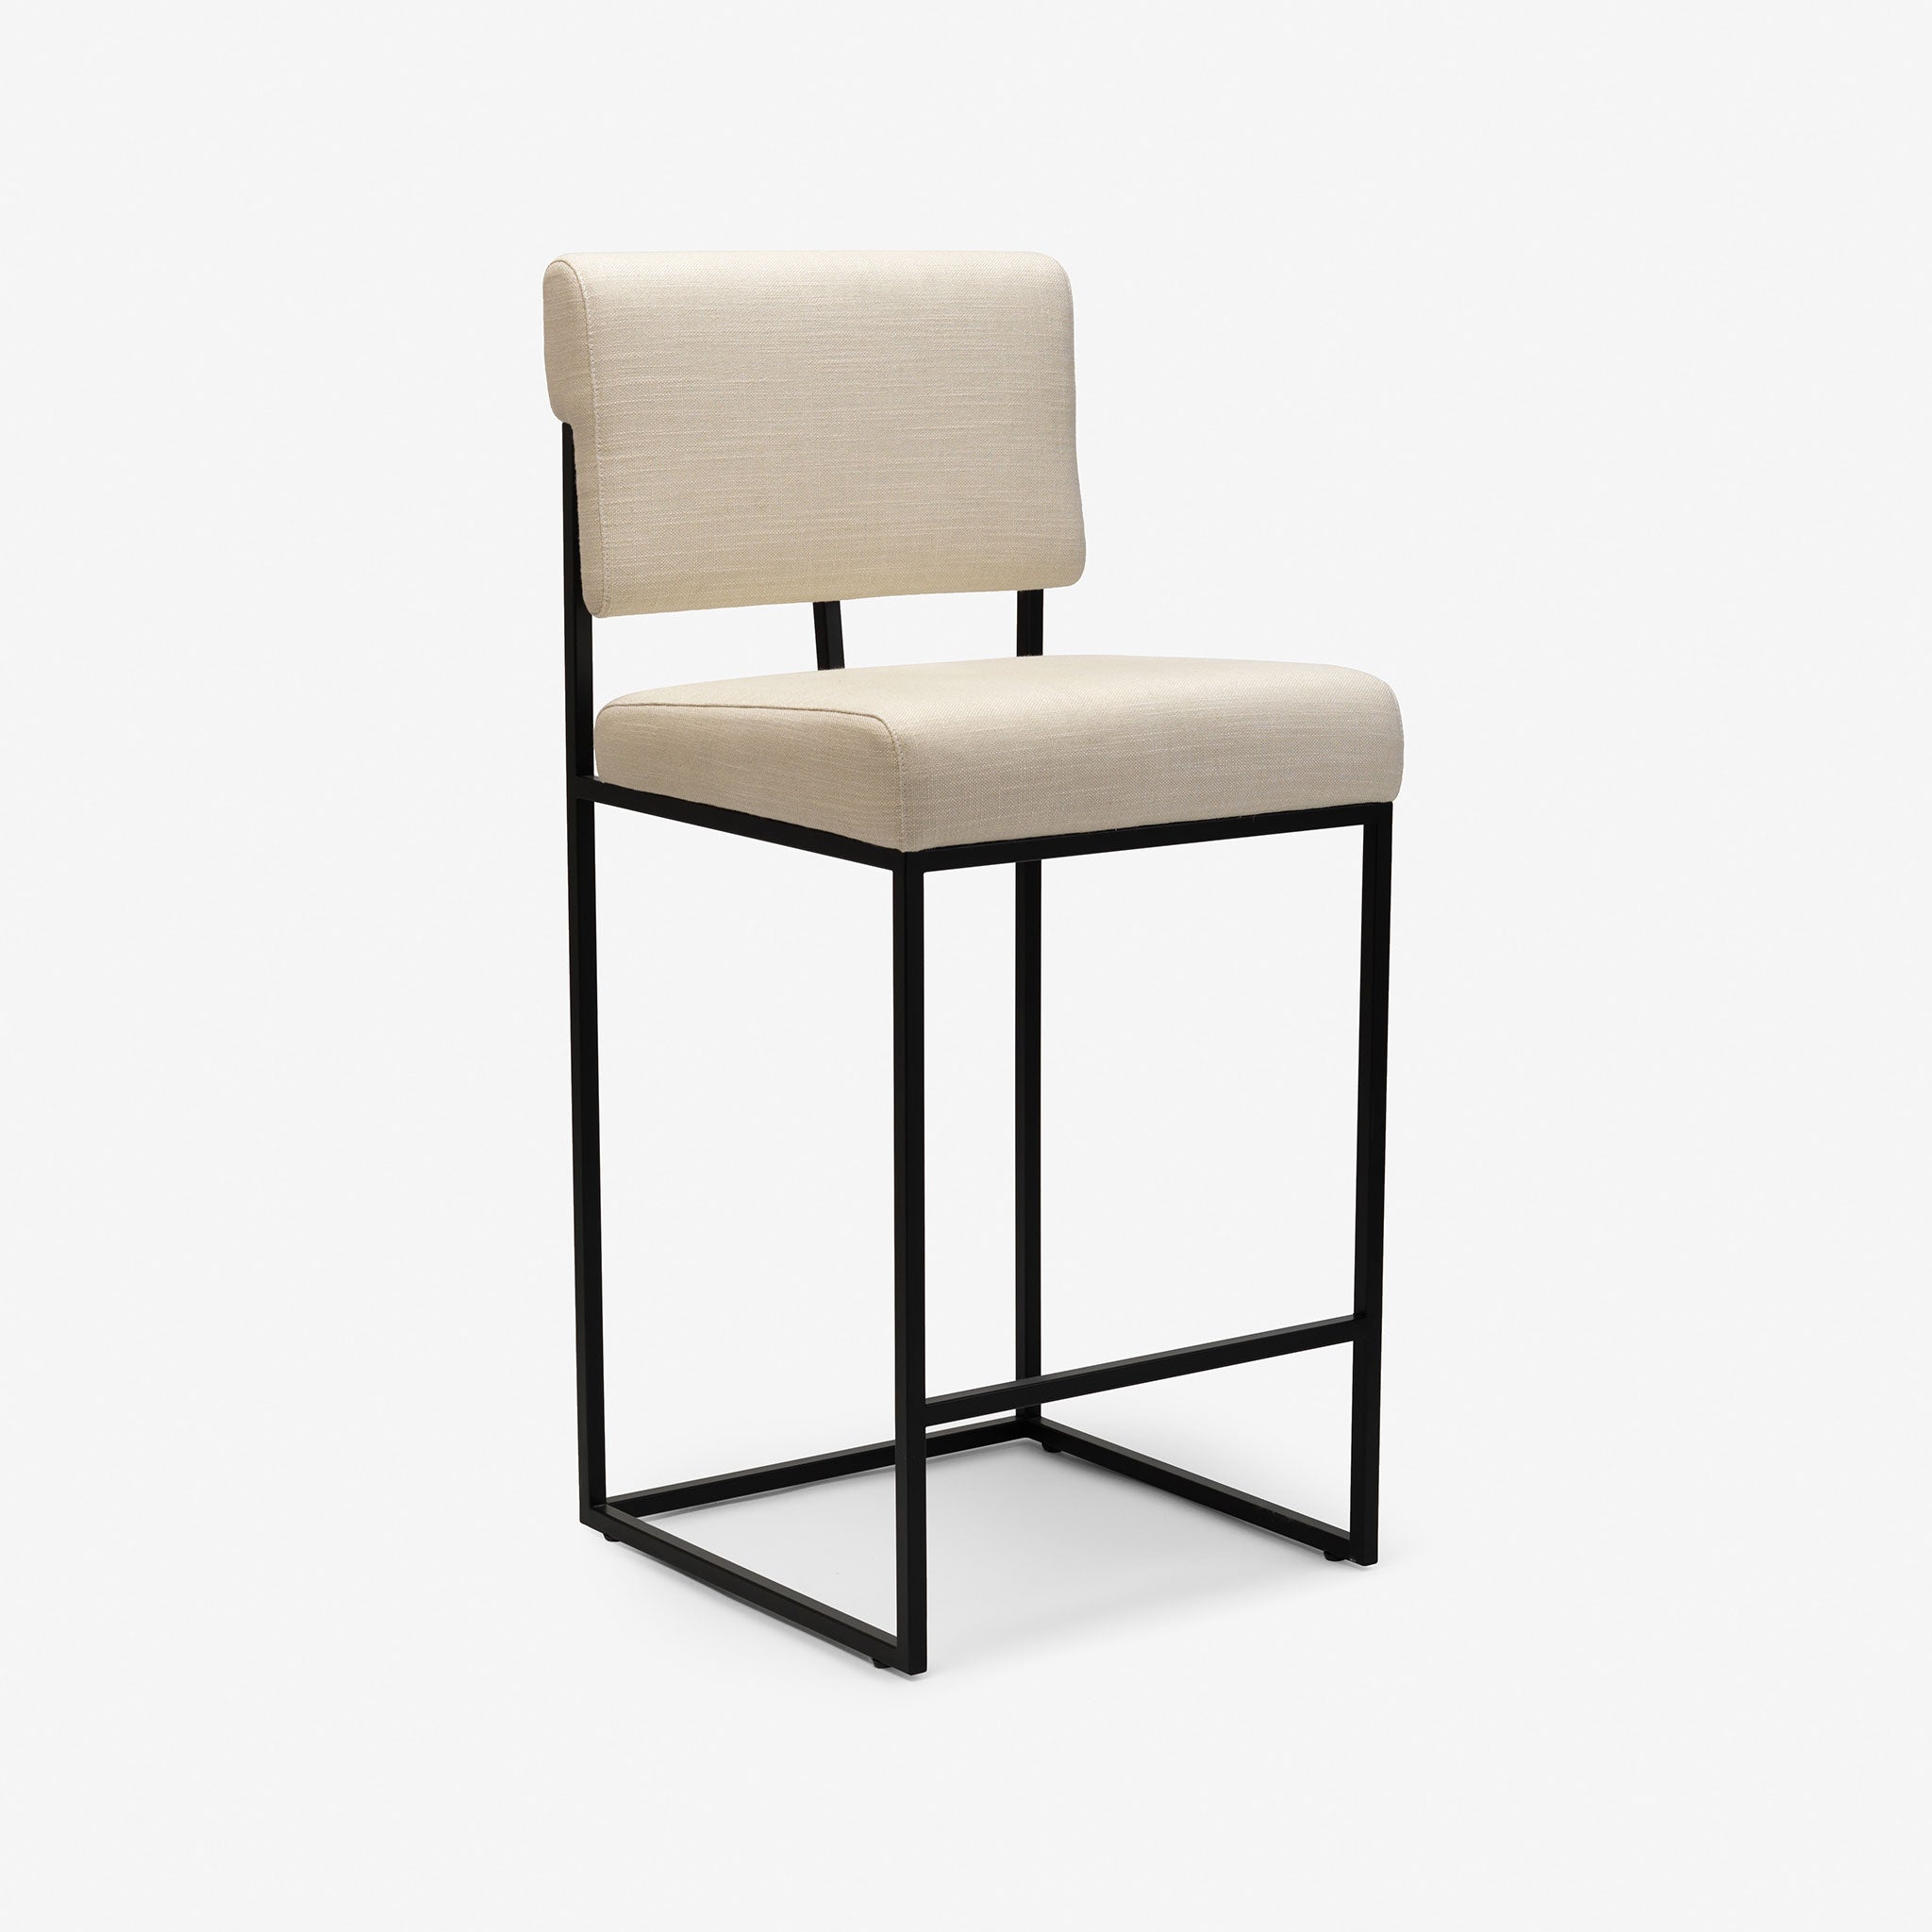 Luxury furniture, Sophisticated Bar Stool, Contemporary Design, Modern Design, Upholstery